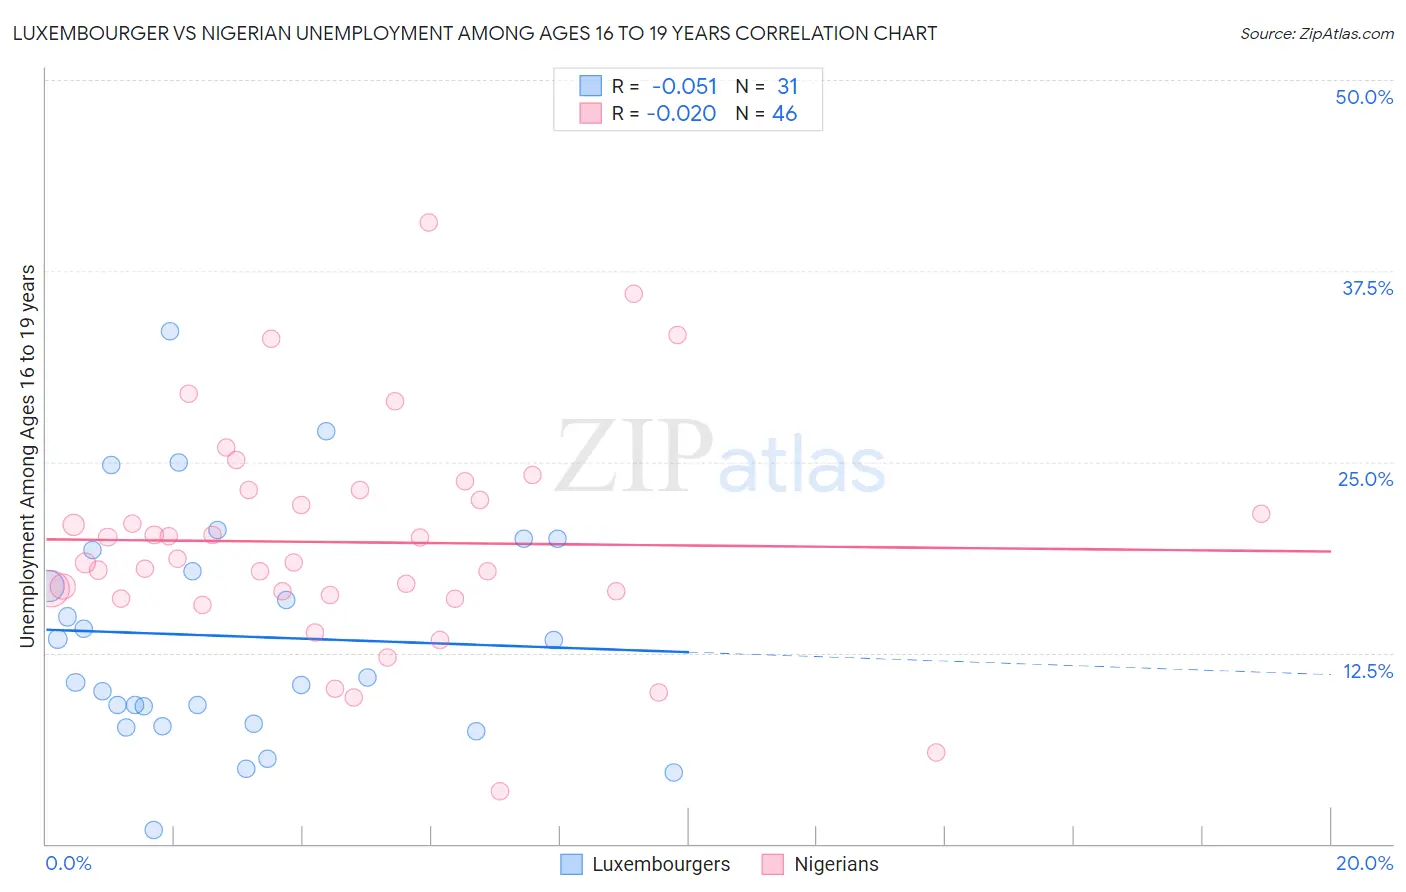 Luxembourger vs Nigerian Unemployment Among Ages 16 to 19 years